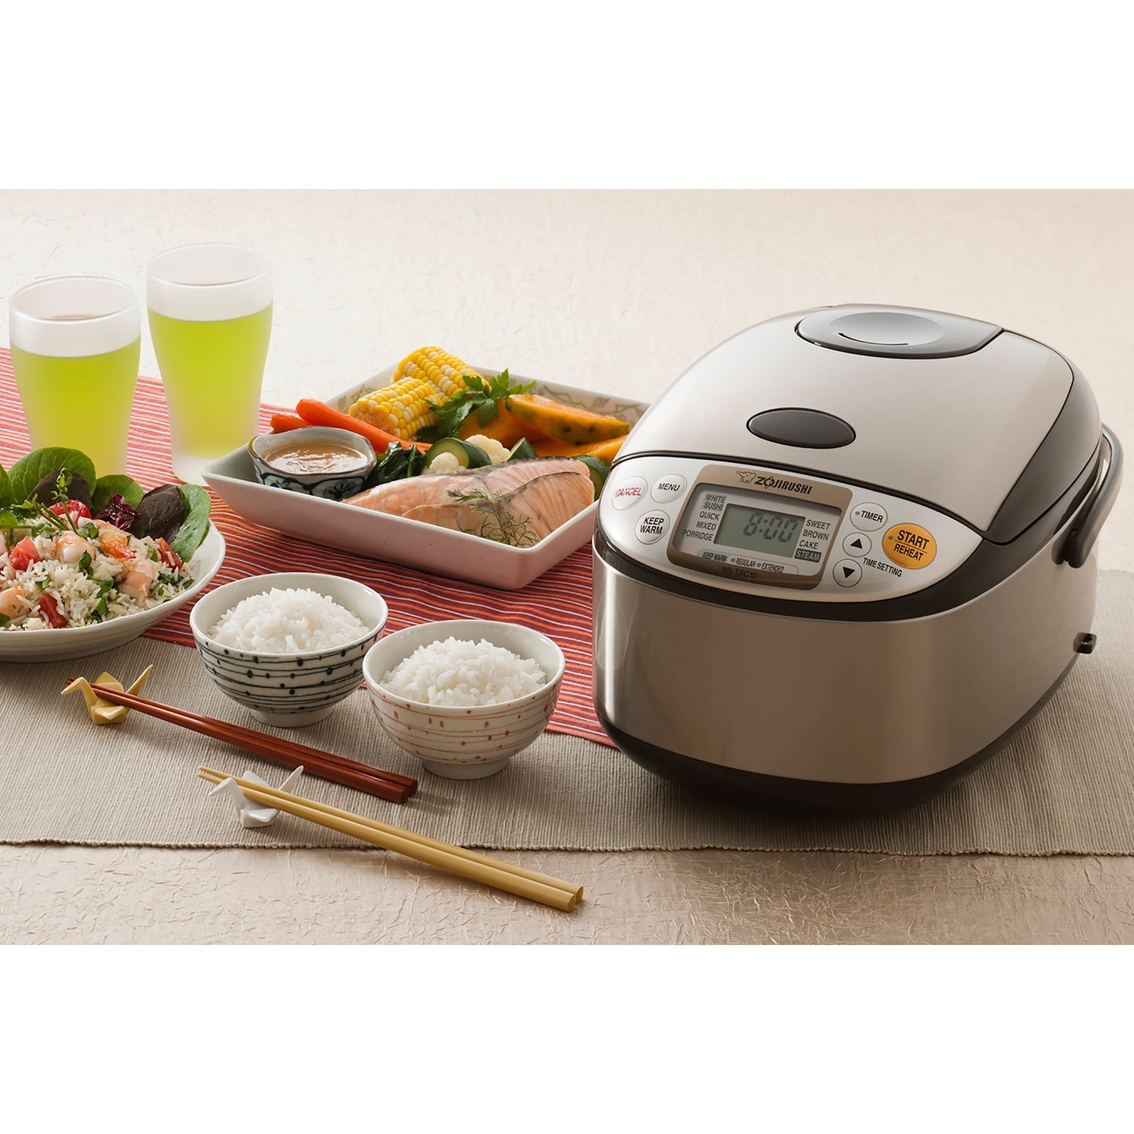 Zojirushi Micom 5.5 Cup Rice Cooker And Warmer, Cookers & Steamers, Furniture & Appliances